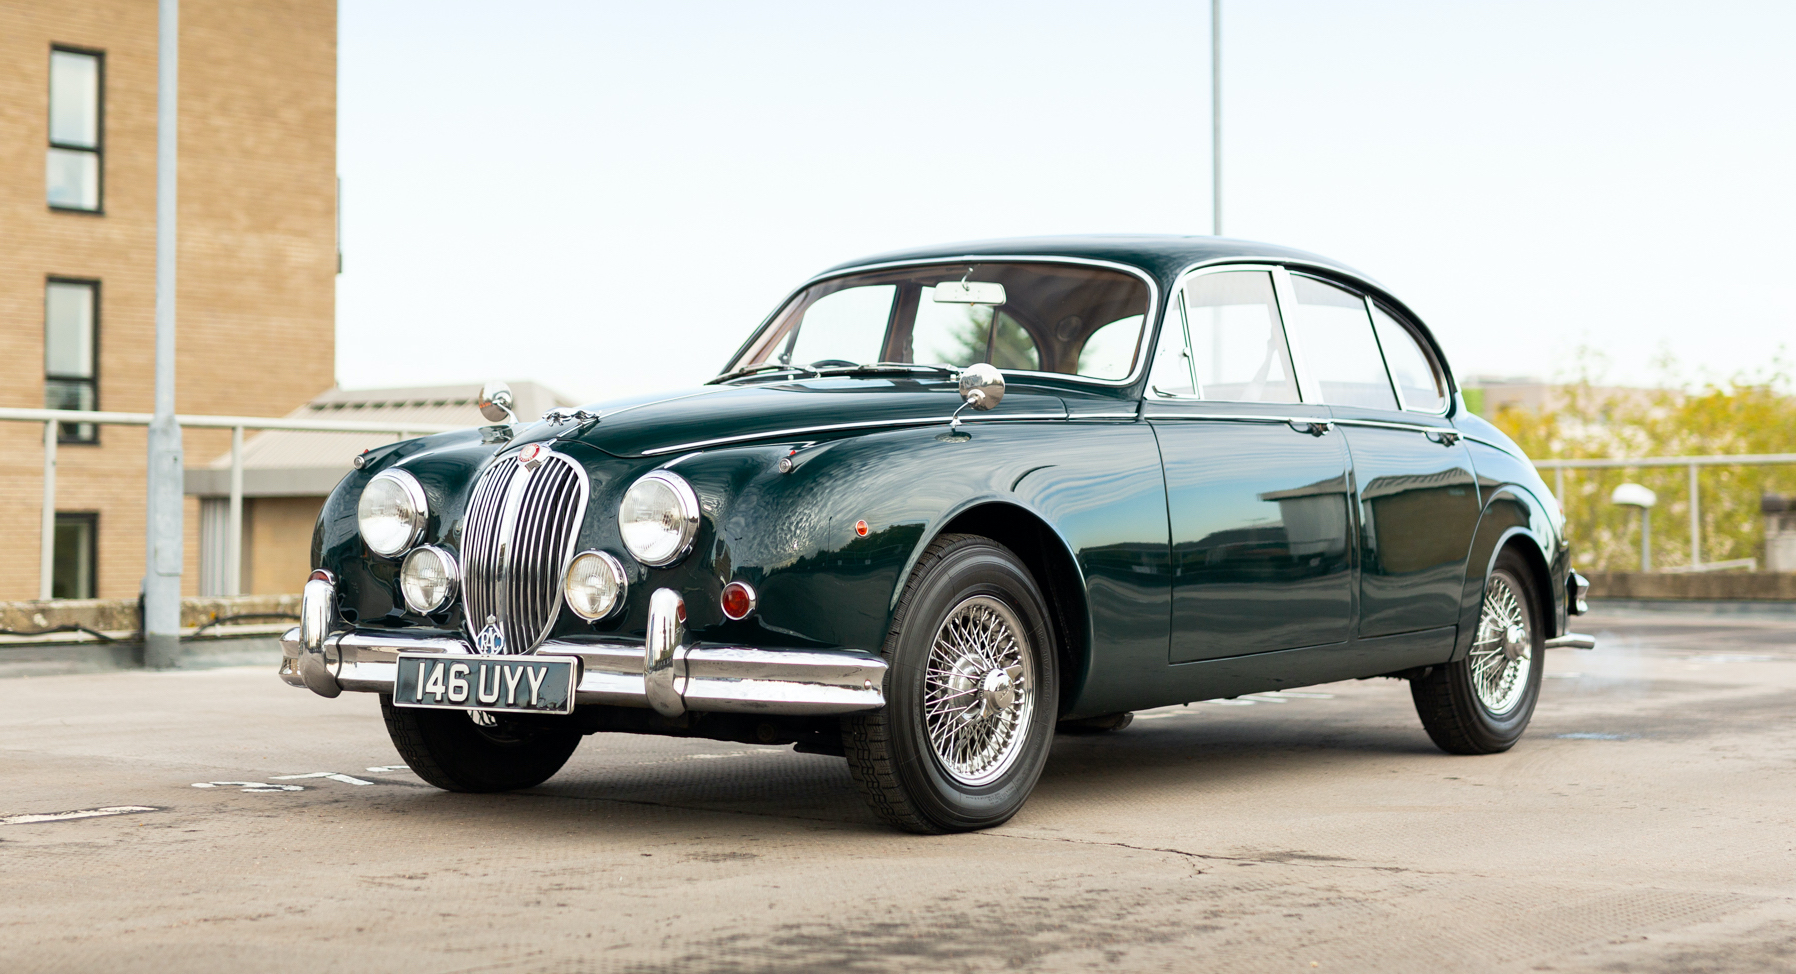 1960 JAGUAR MKII 3.8 for sale by auction in Borehamwood, United 